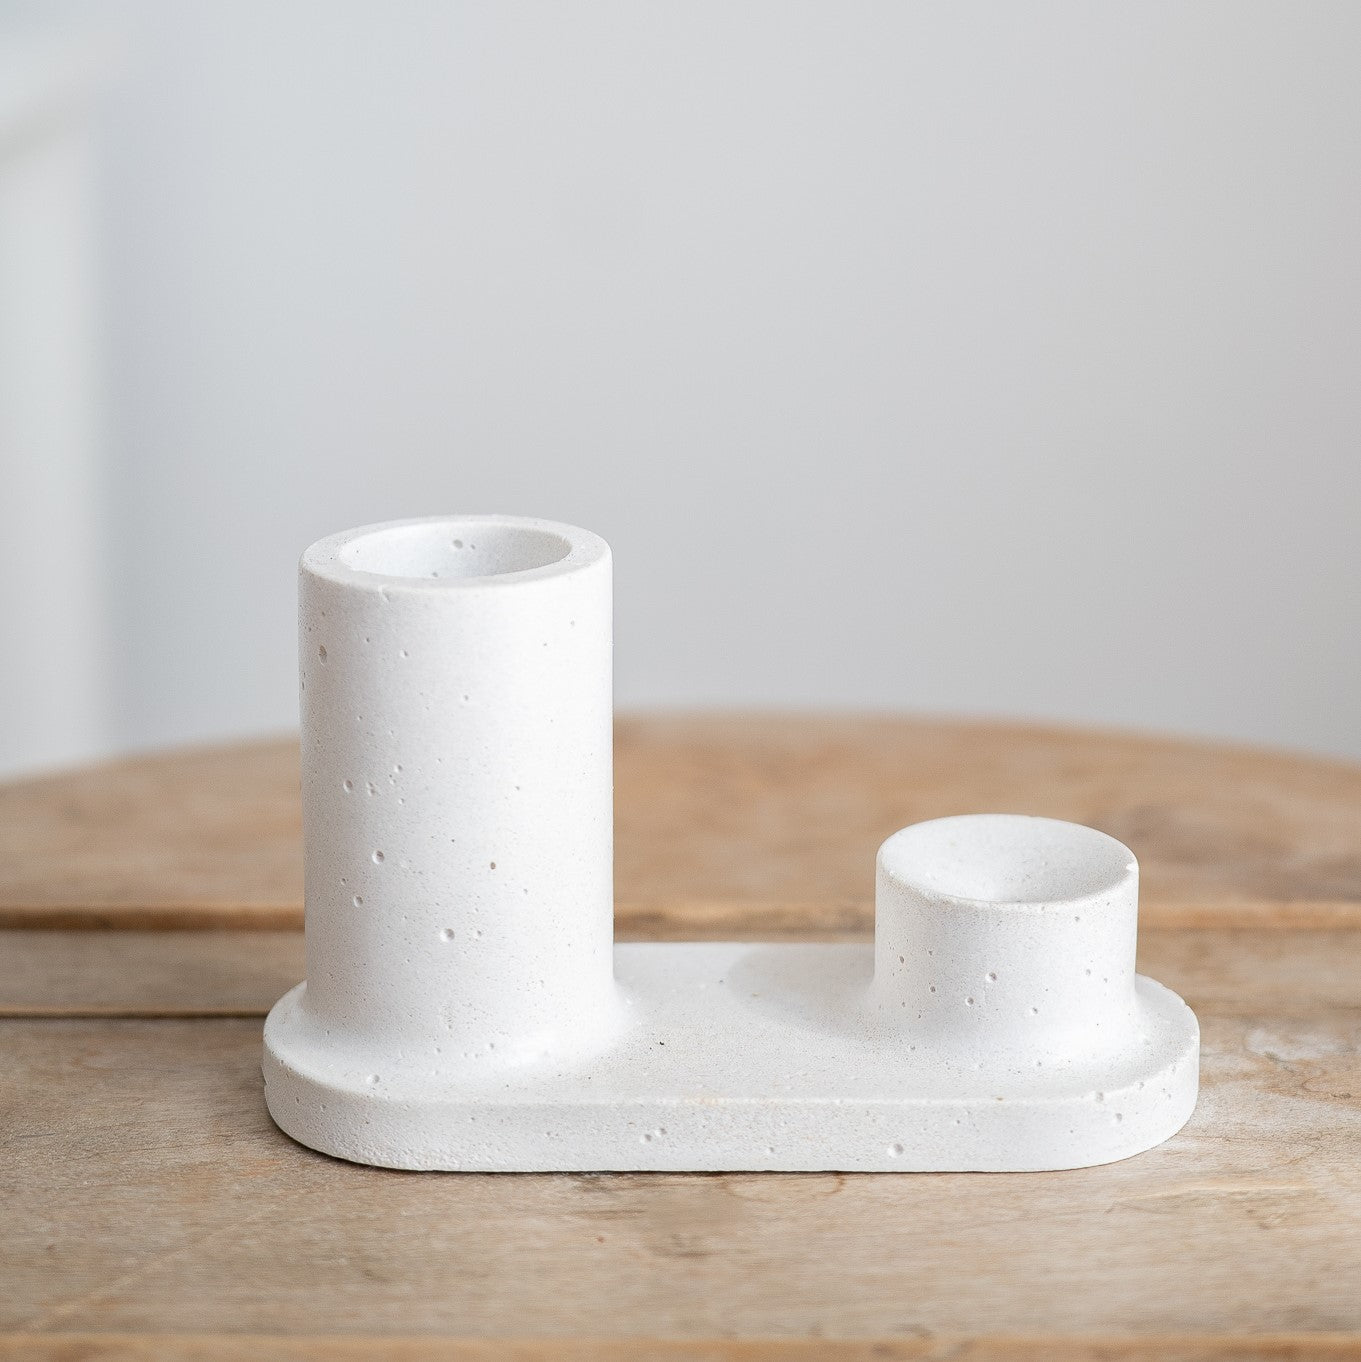 Circular incense holder hand-made with white cement. Made by Paige Soy Candles